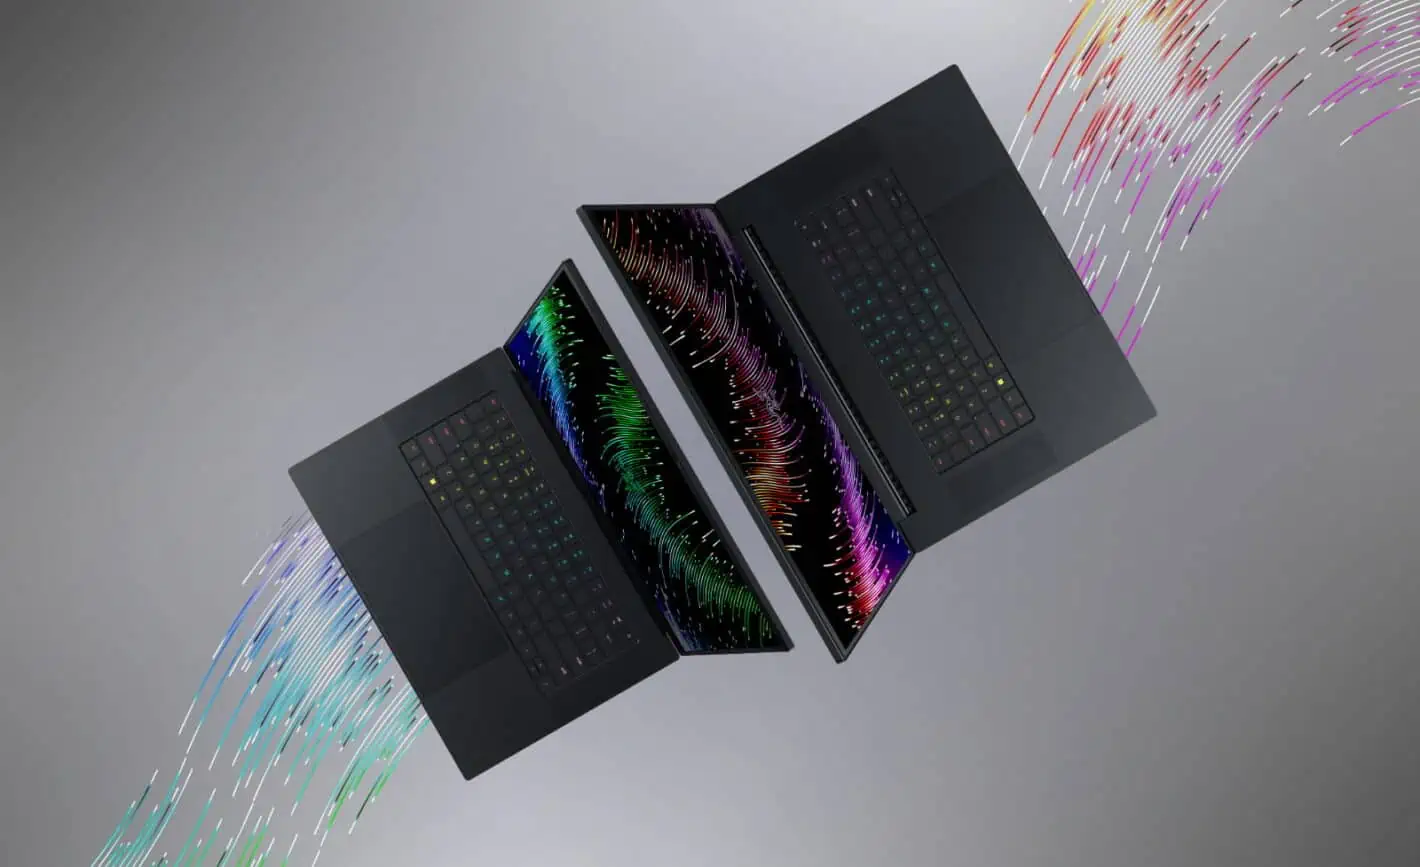 Featured image for Razer's Blade 16 and Blade 18 gaming laptops launch this week